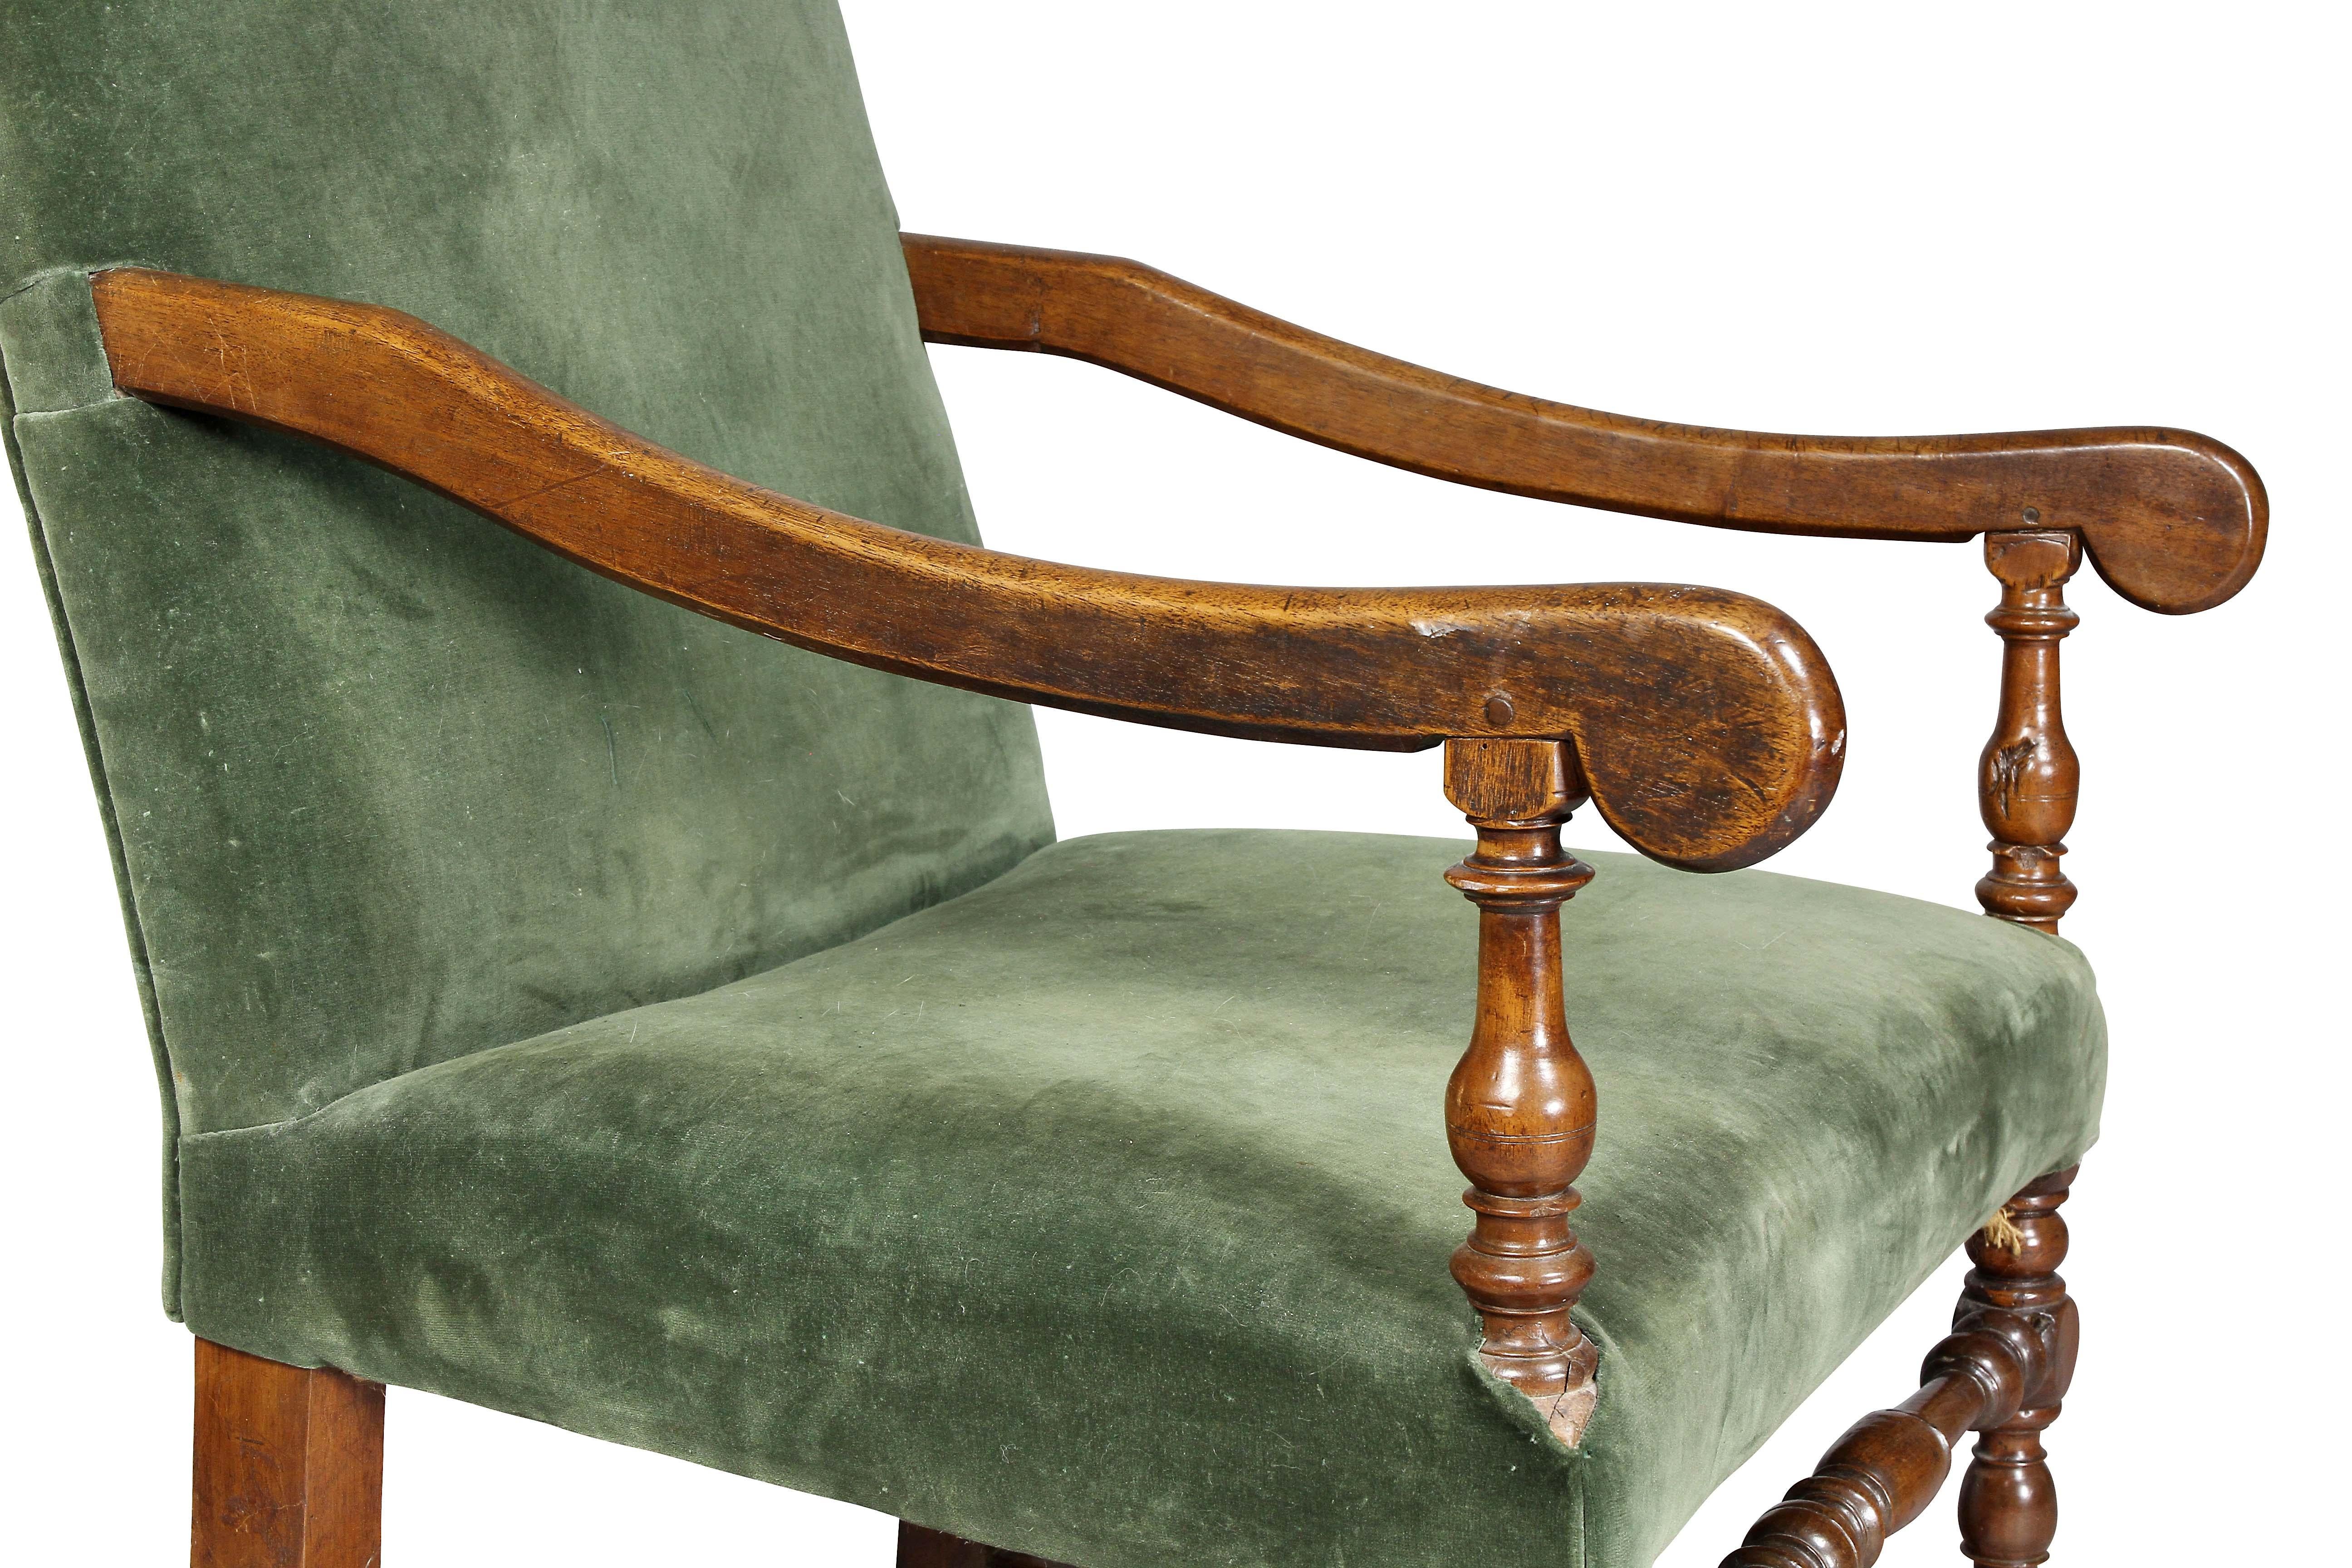 Arched upholstered back, downswept arms, turned legs and H-stretcher.